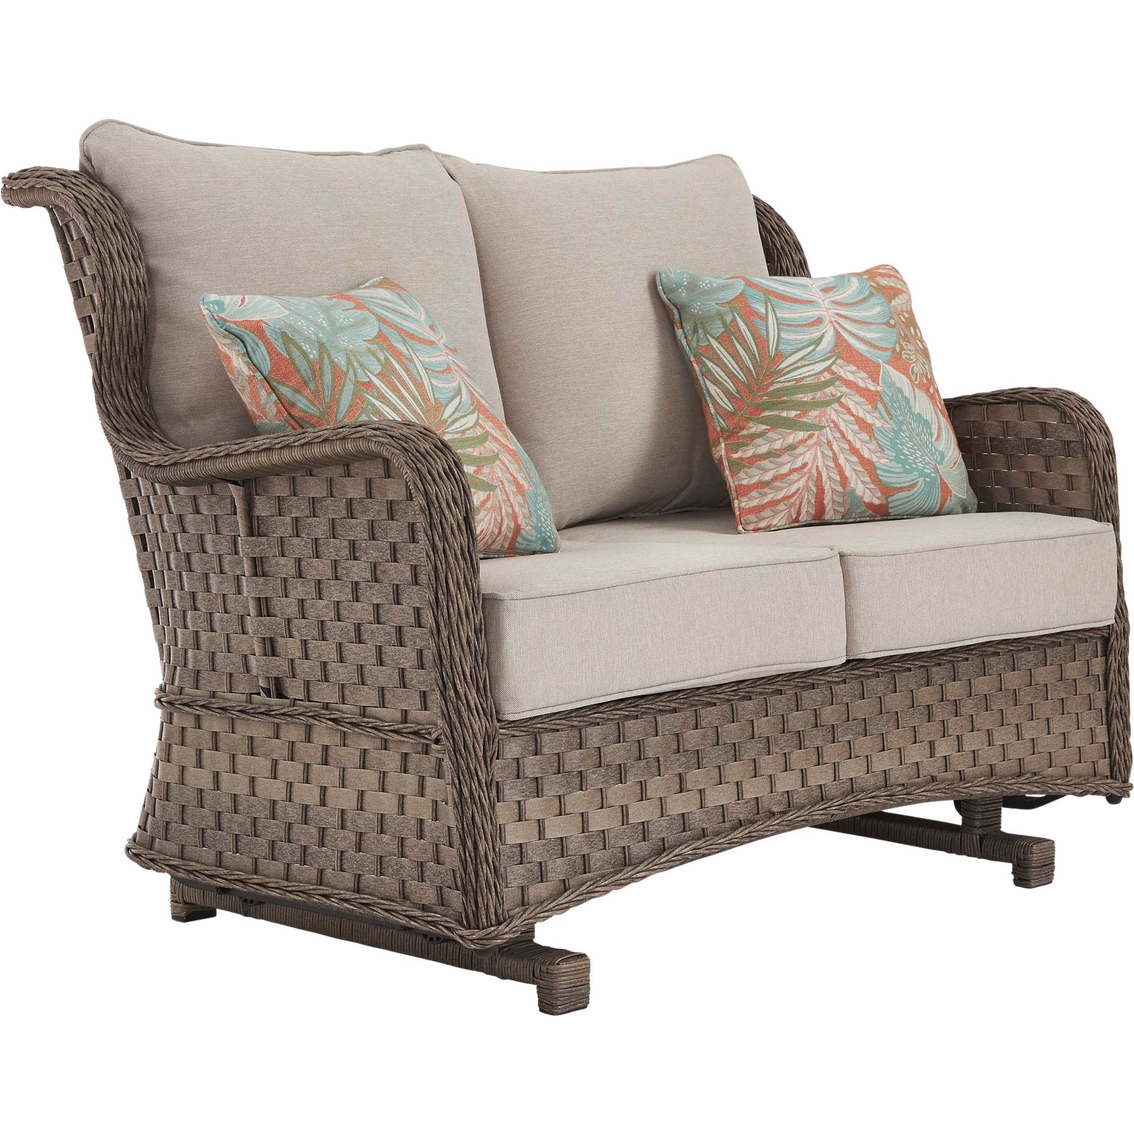 Signature Design by Ashley Clear Ridge Outdoor Loveseat Glider - Image 1 of 7